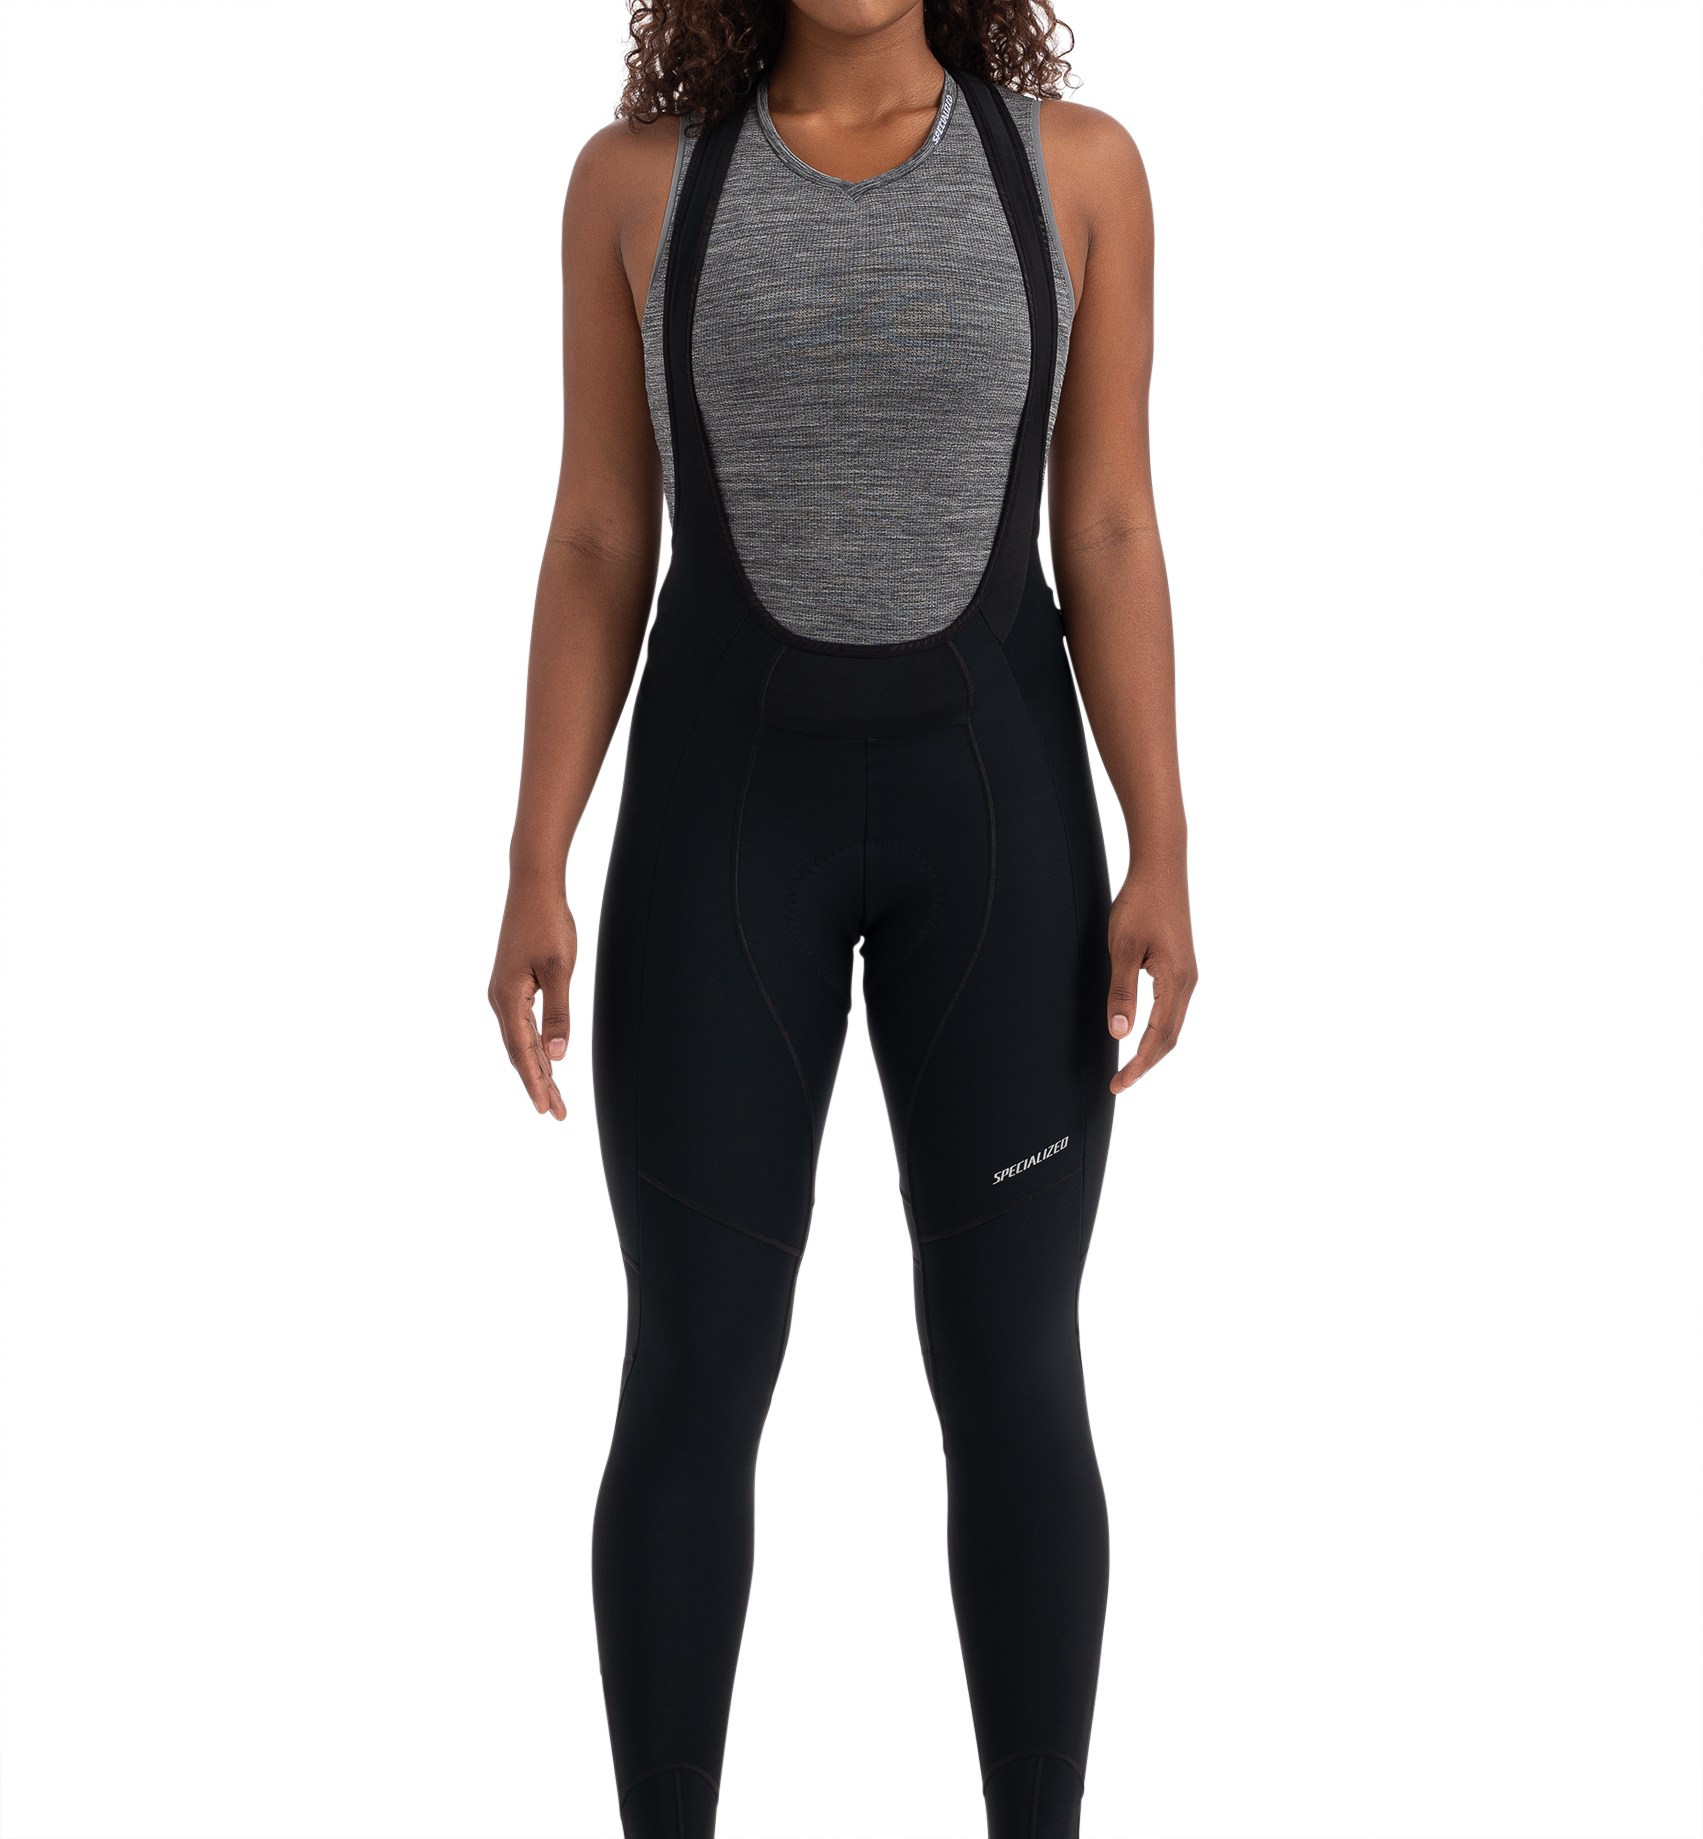 https://assets.specialized.com/i/specialized/64220-140_APP_ELEMENT-CYCLING-BIB-TIGHT-WMN-BLK-M_HERO